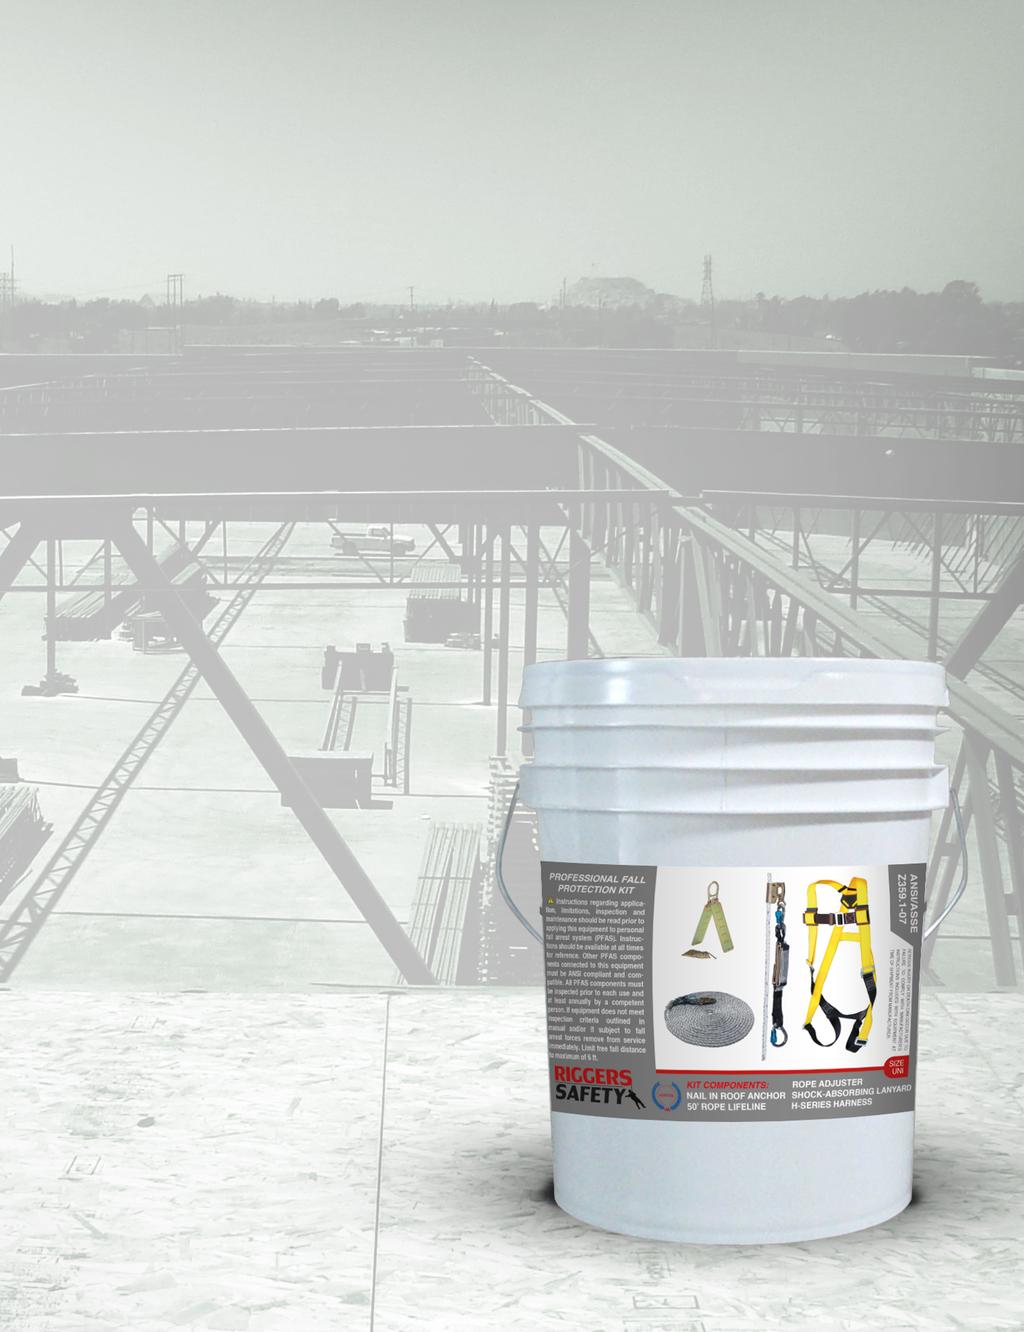 WE SIMPLIFIED YOUR SAFETY SOLUTION TO ONE BUCKET STANDARD CONSTRUCTION FALL PROTECTION KIT Complete fall protection system available in a convenient kit ready to deploy whenever it s needed.